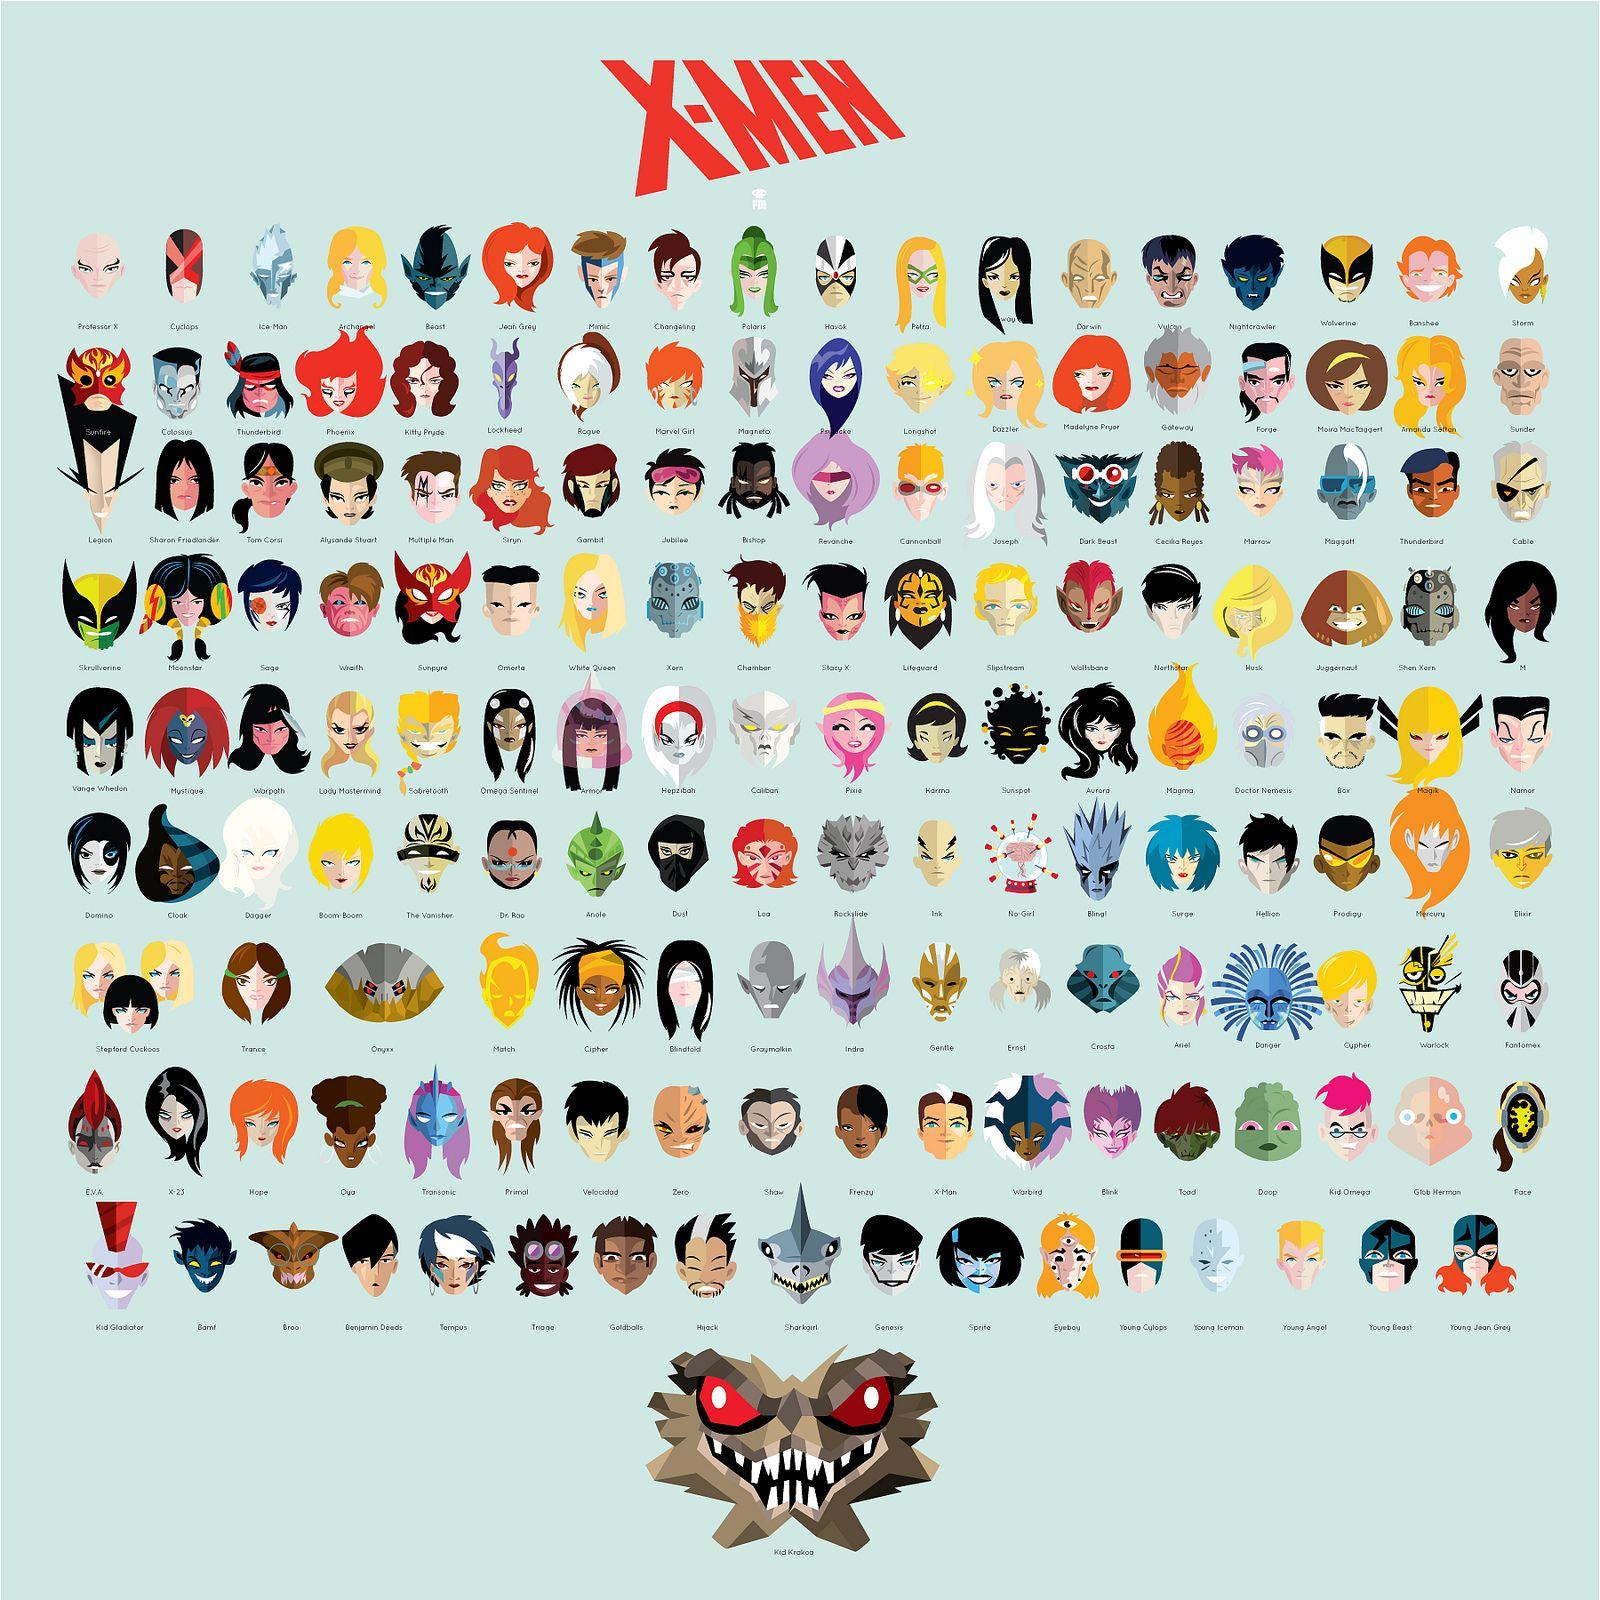 All the X-Men Superhero Logo - Stylized Illustration Featuring The Faces Of X Men Superheroes